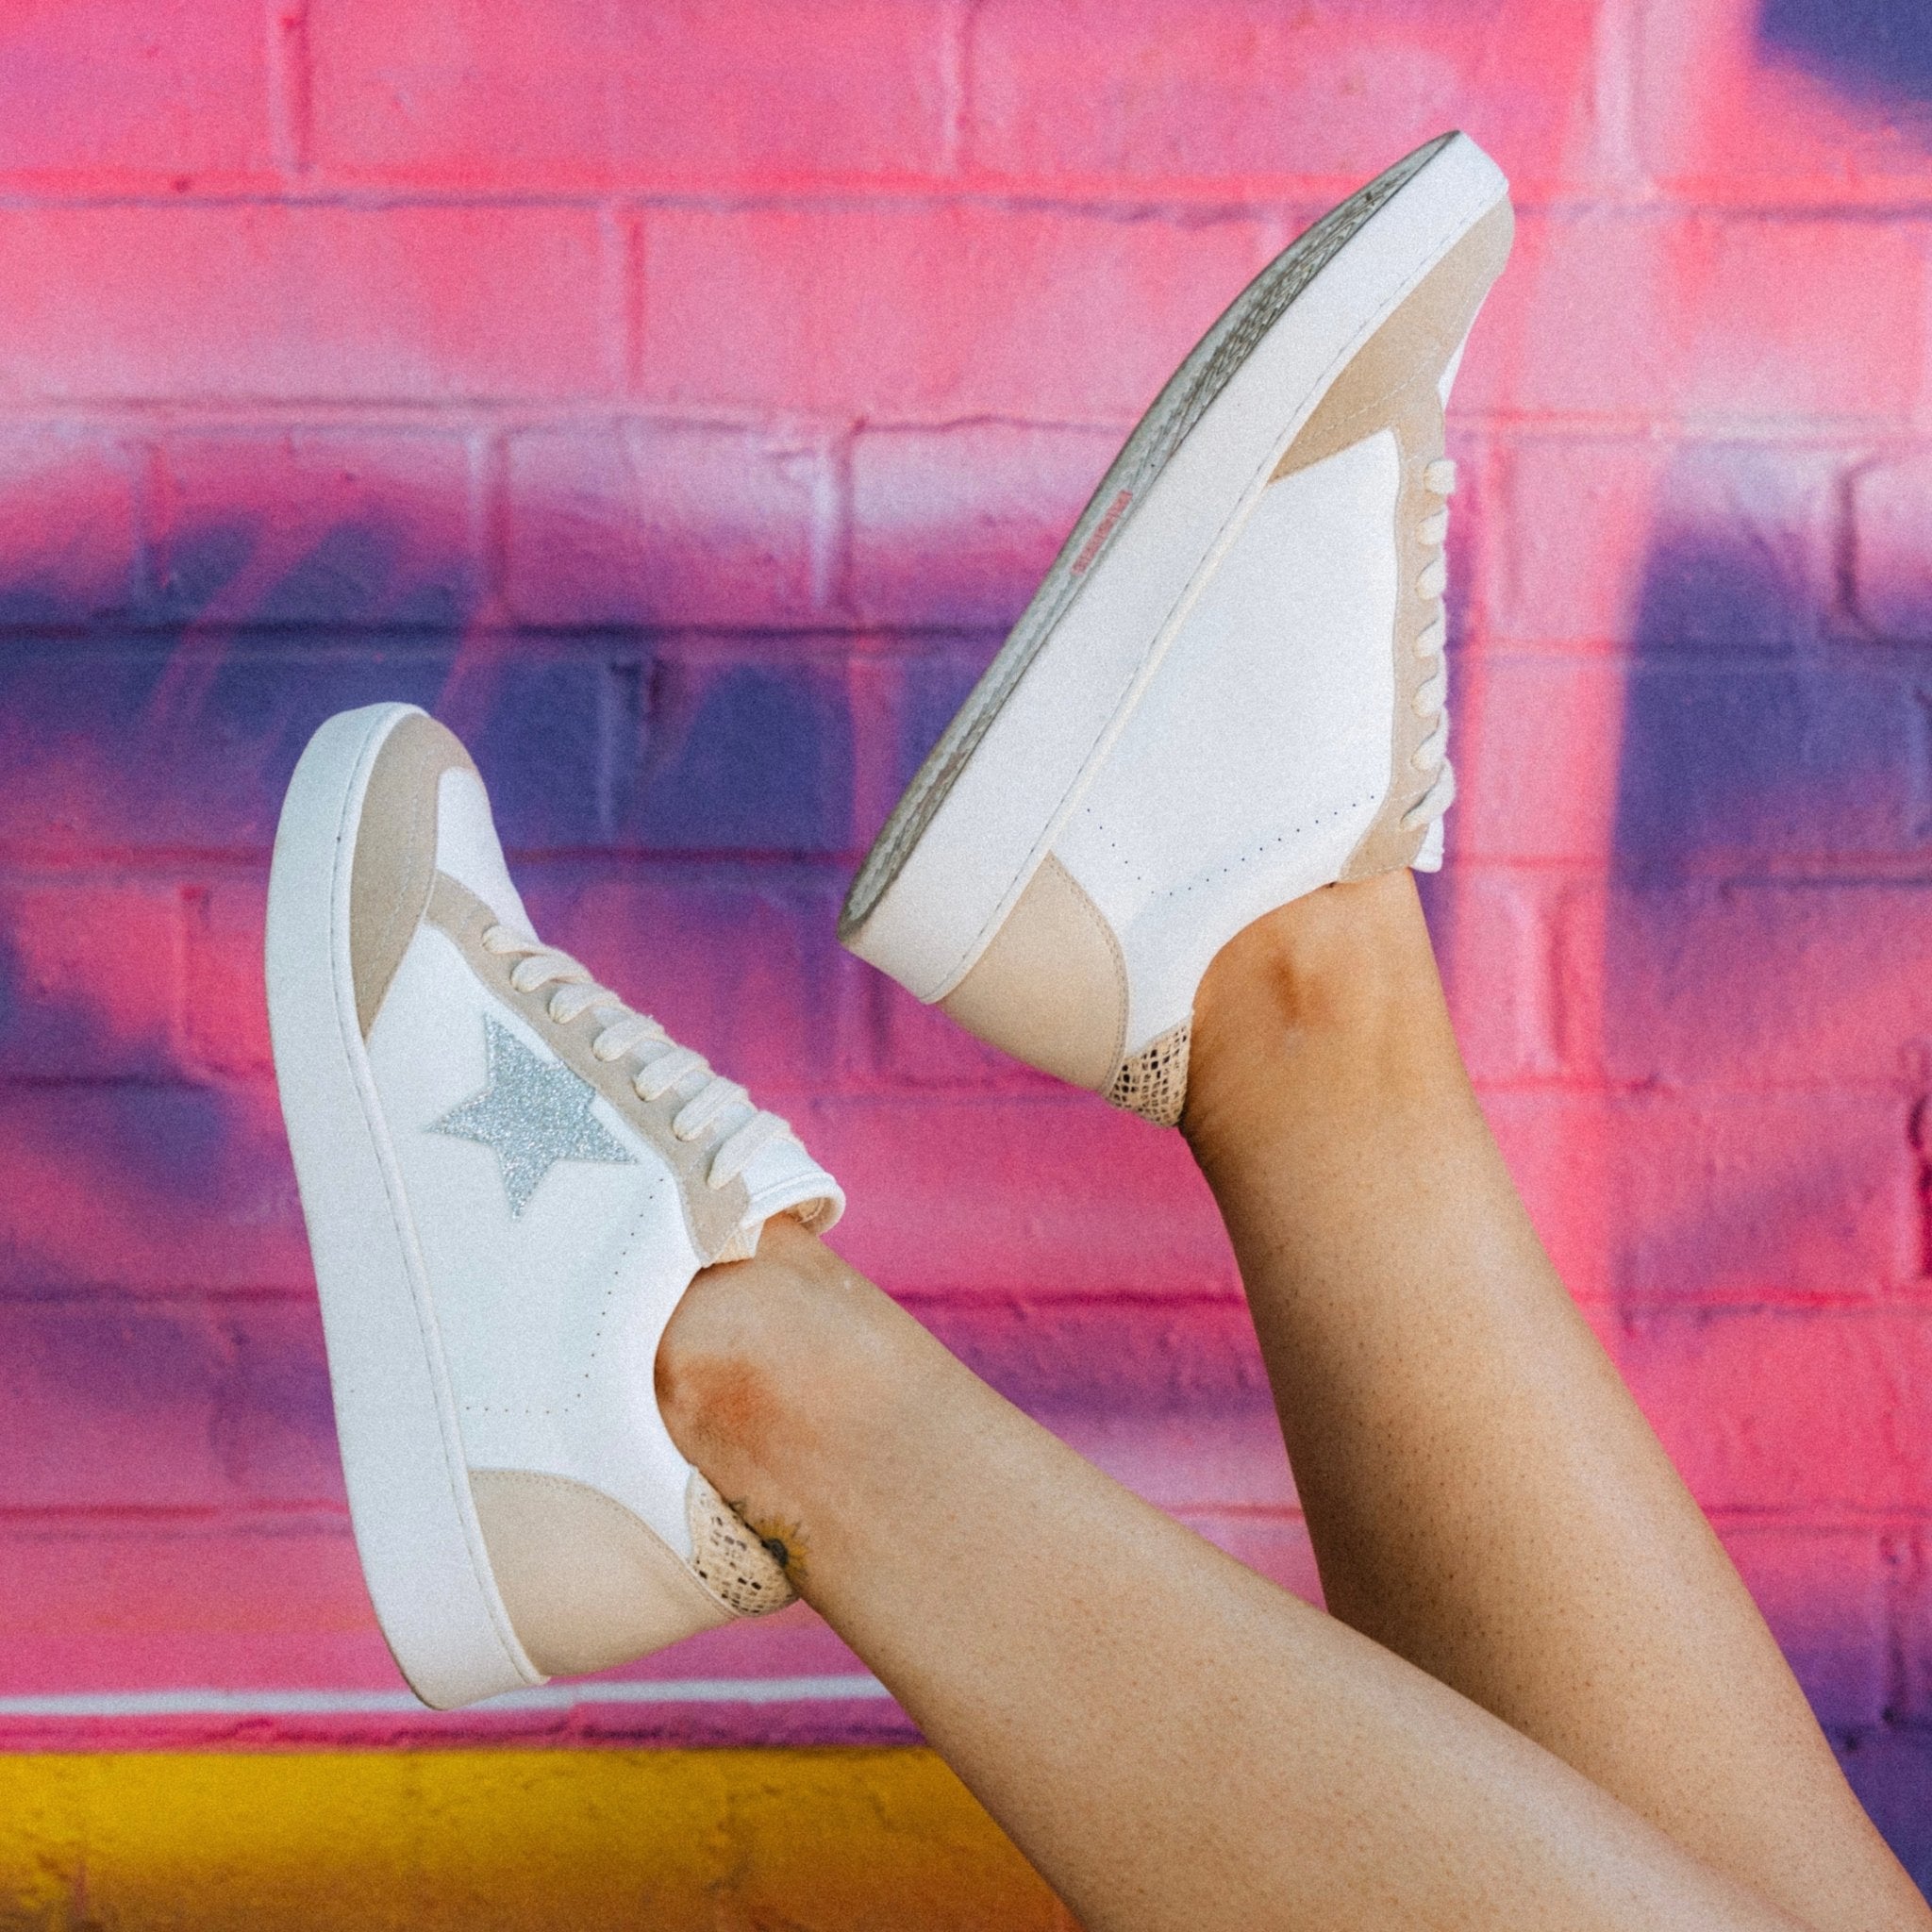 Star sneakers against a colorful fun wall from Lush Fashion Lounge women's boutique in Oklahoma City 